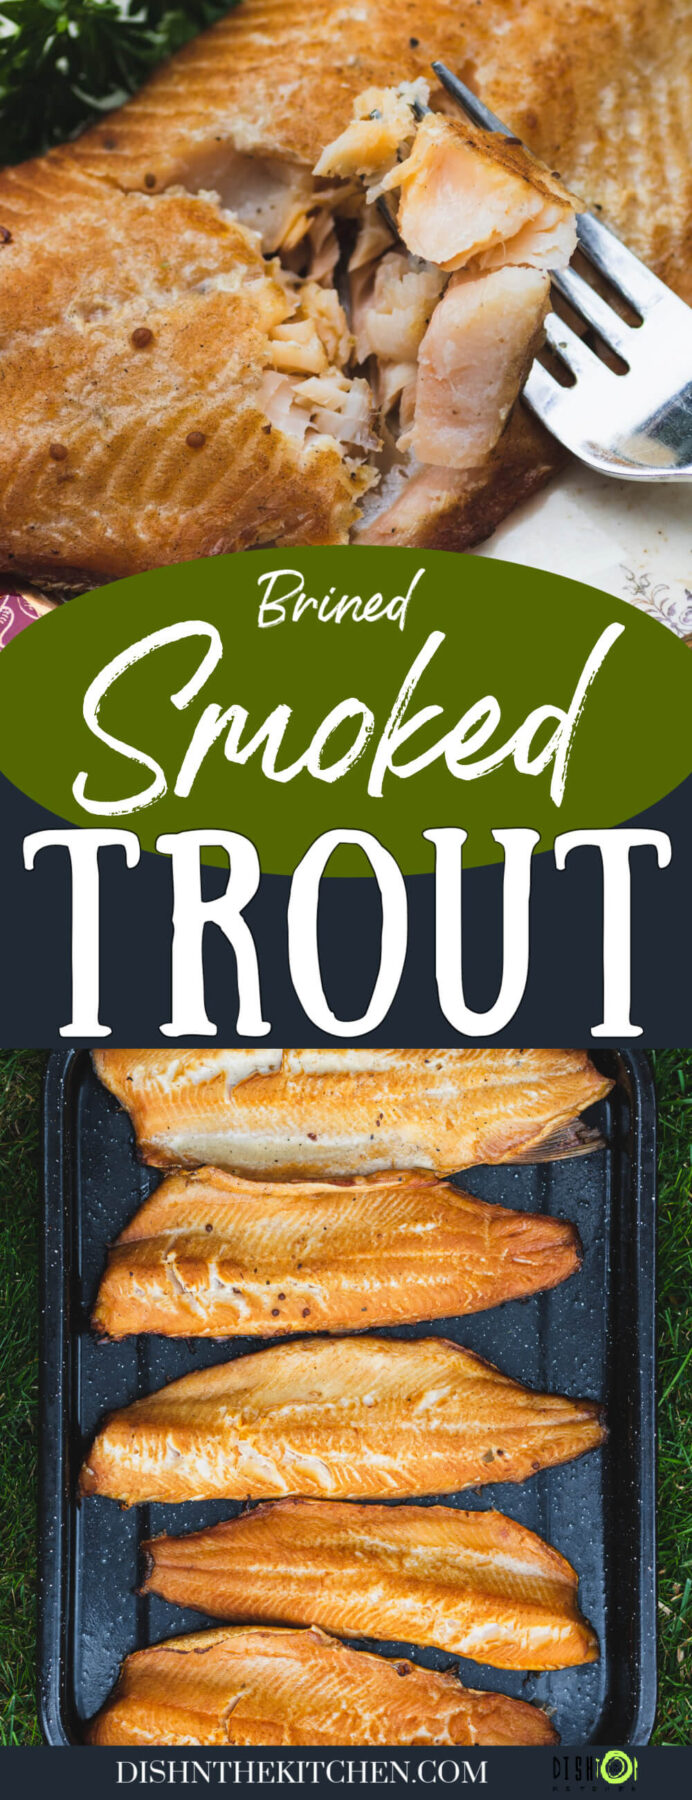 Pinterest image featuring a black enamel tray with five smoked trout filets and a fork holding a bite of juicy smoked trout.